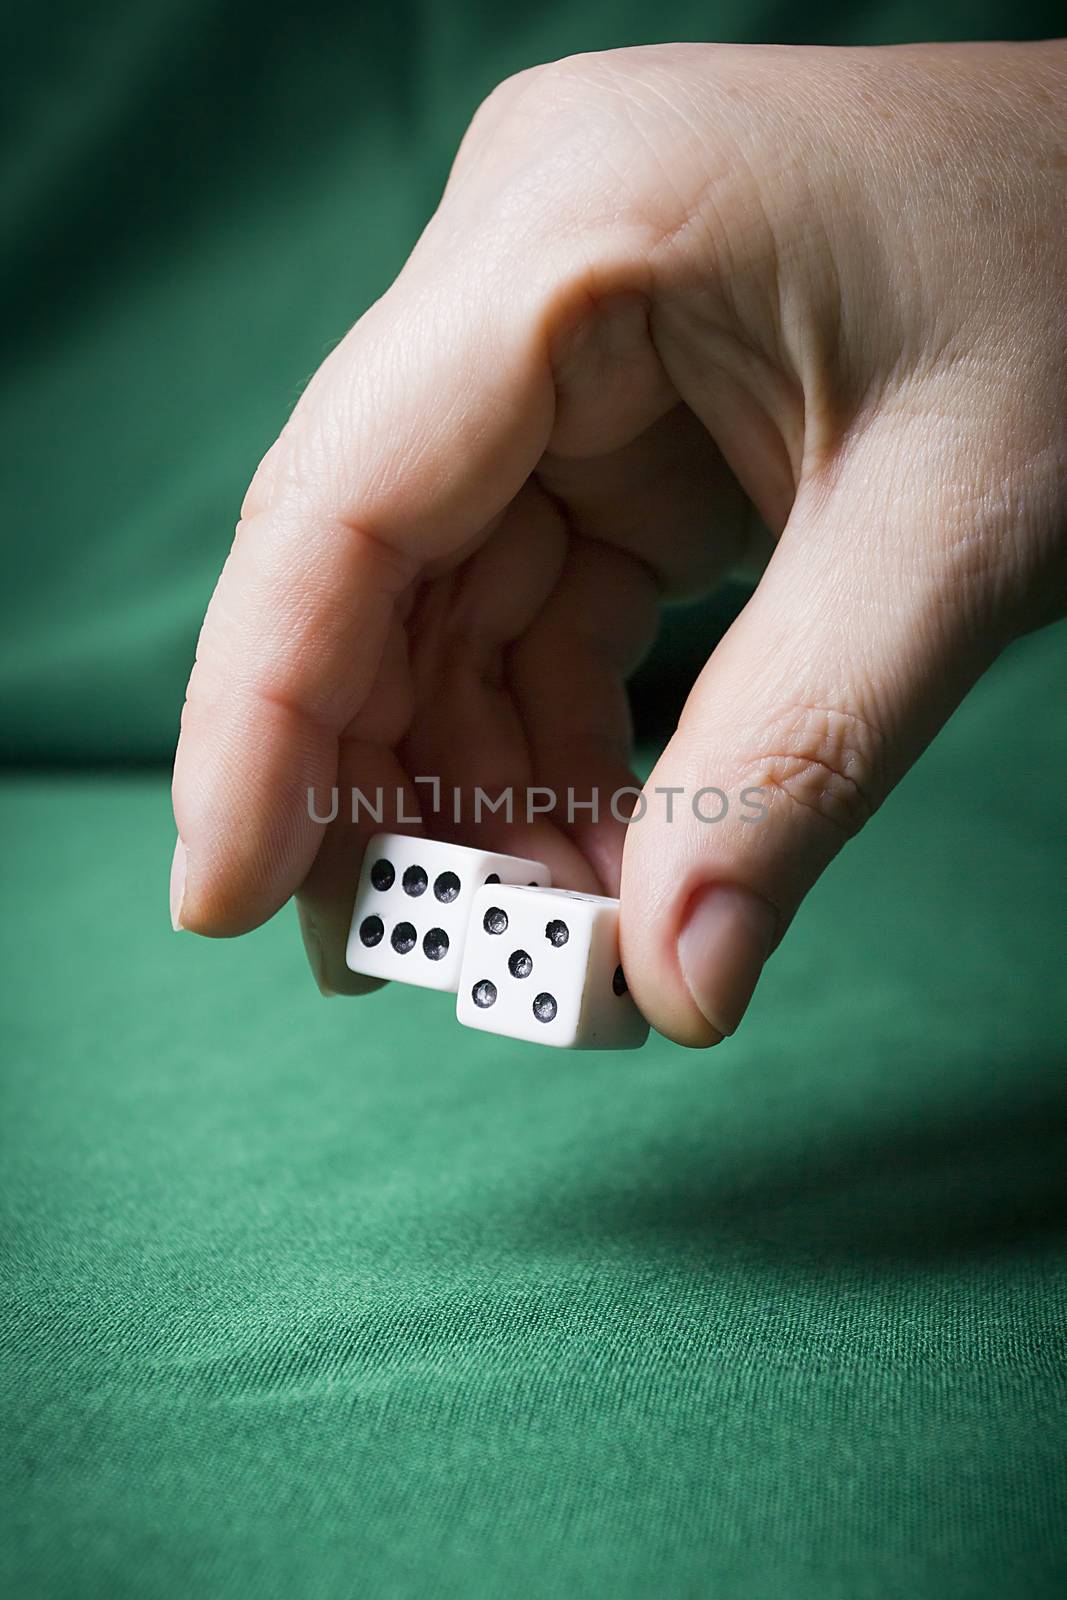 Hand throws dice on a table with green cloth